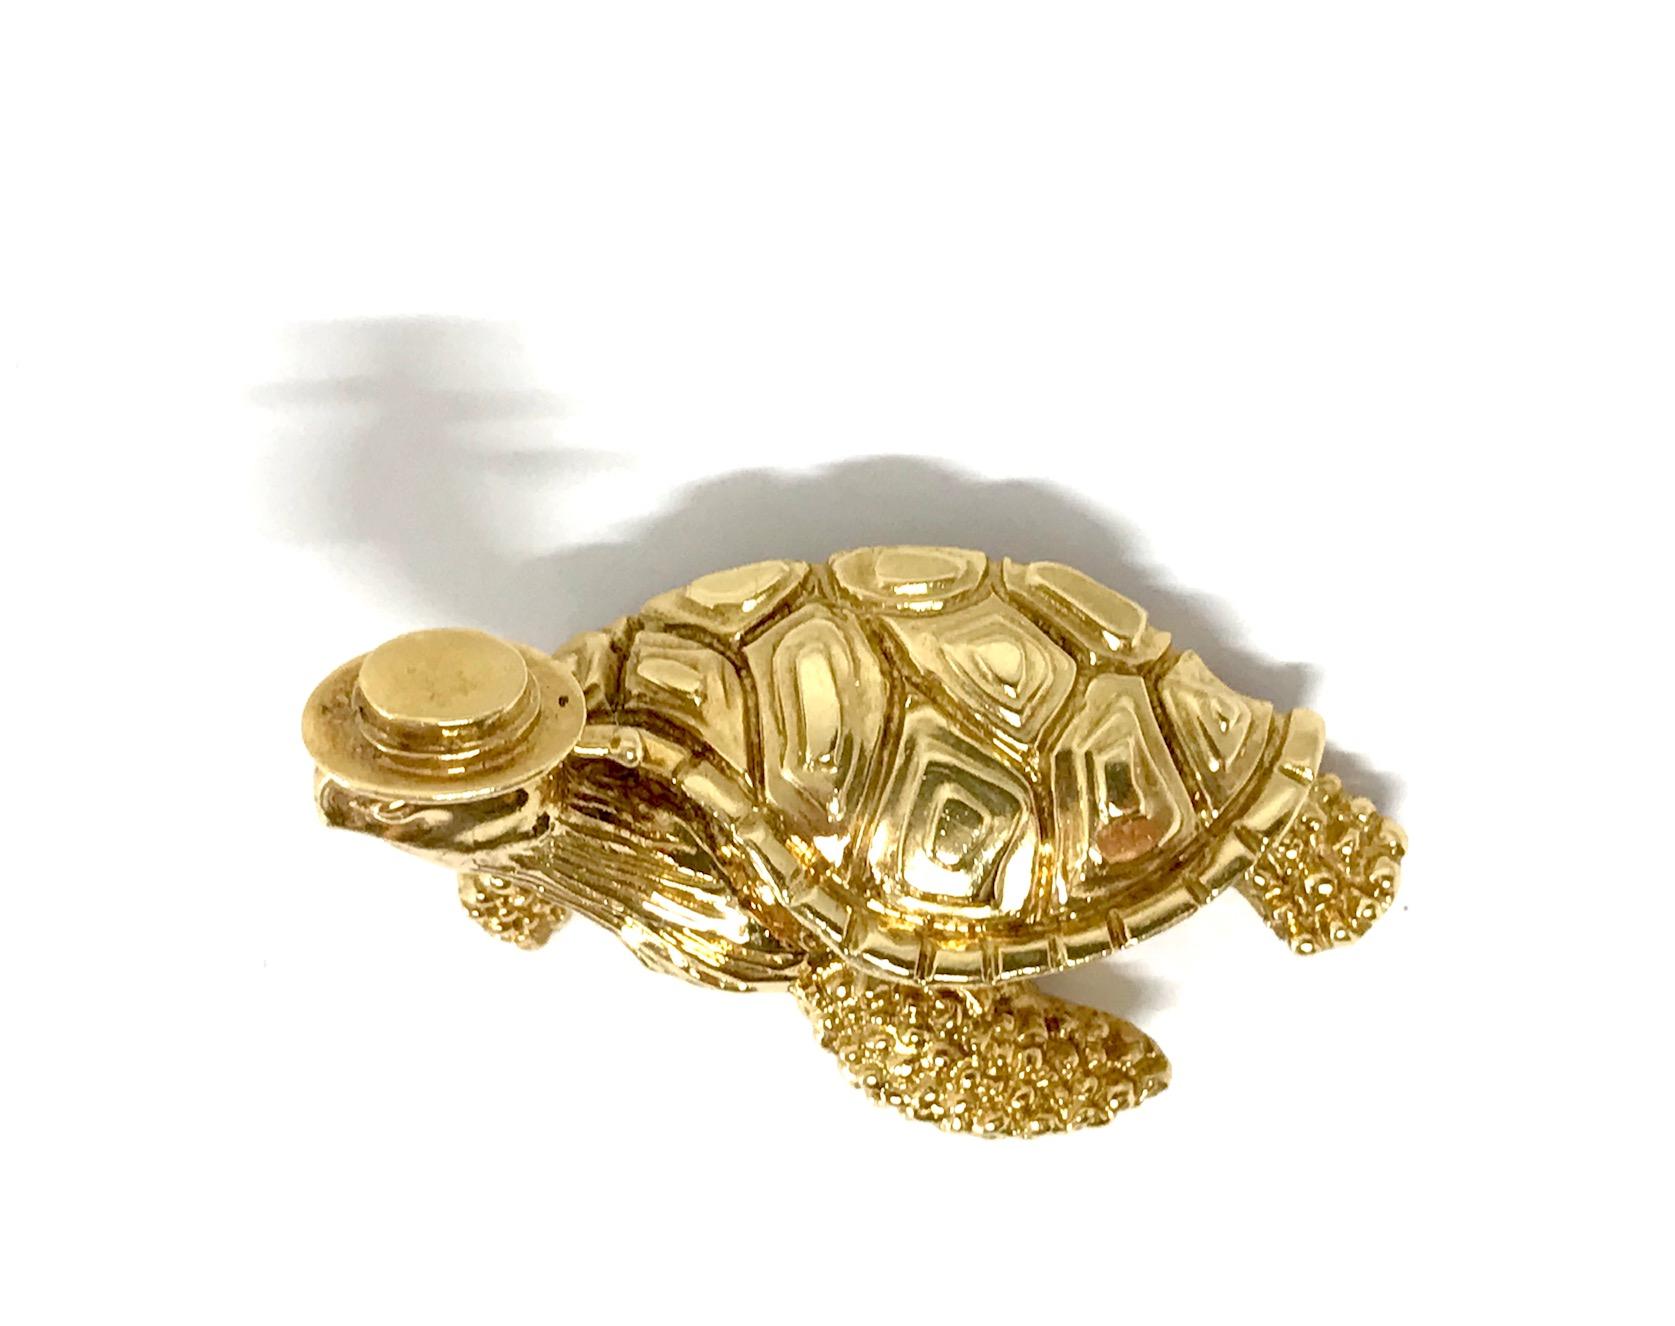 Cute yet stylish vintage Tiffany&Co 18k hammered yellow gold Sea Turtle brooch. Stamped with the Tiffany&Co maker's mark and a hallmark for 18k gold.
Measurements: 1 